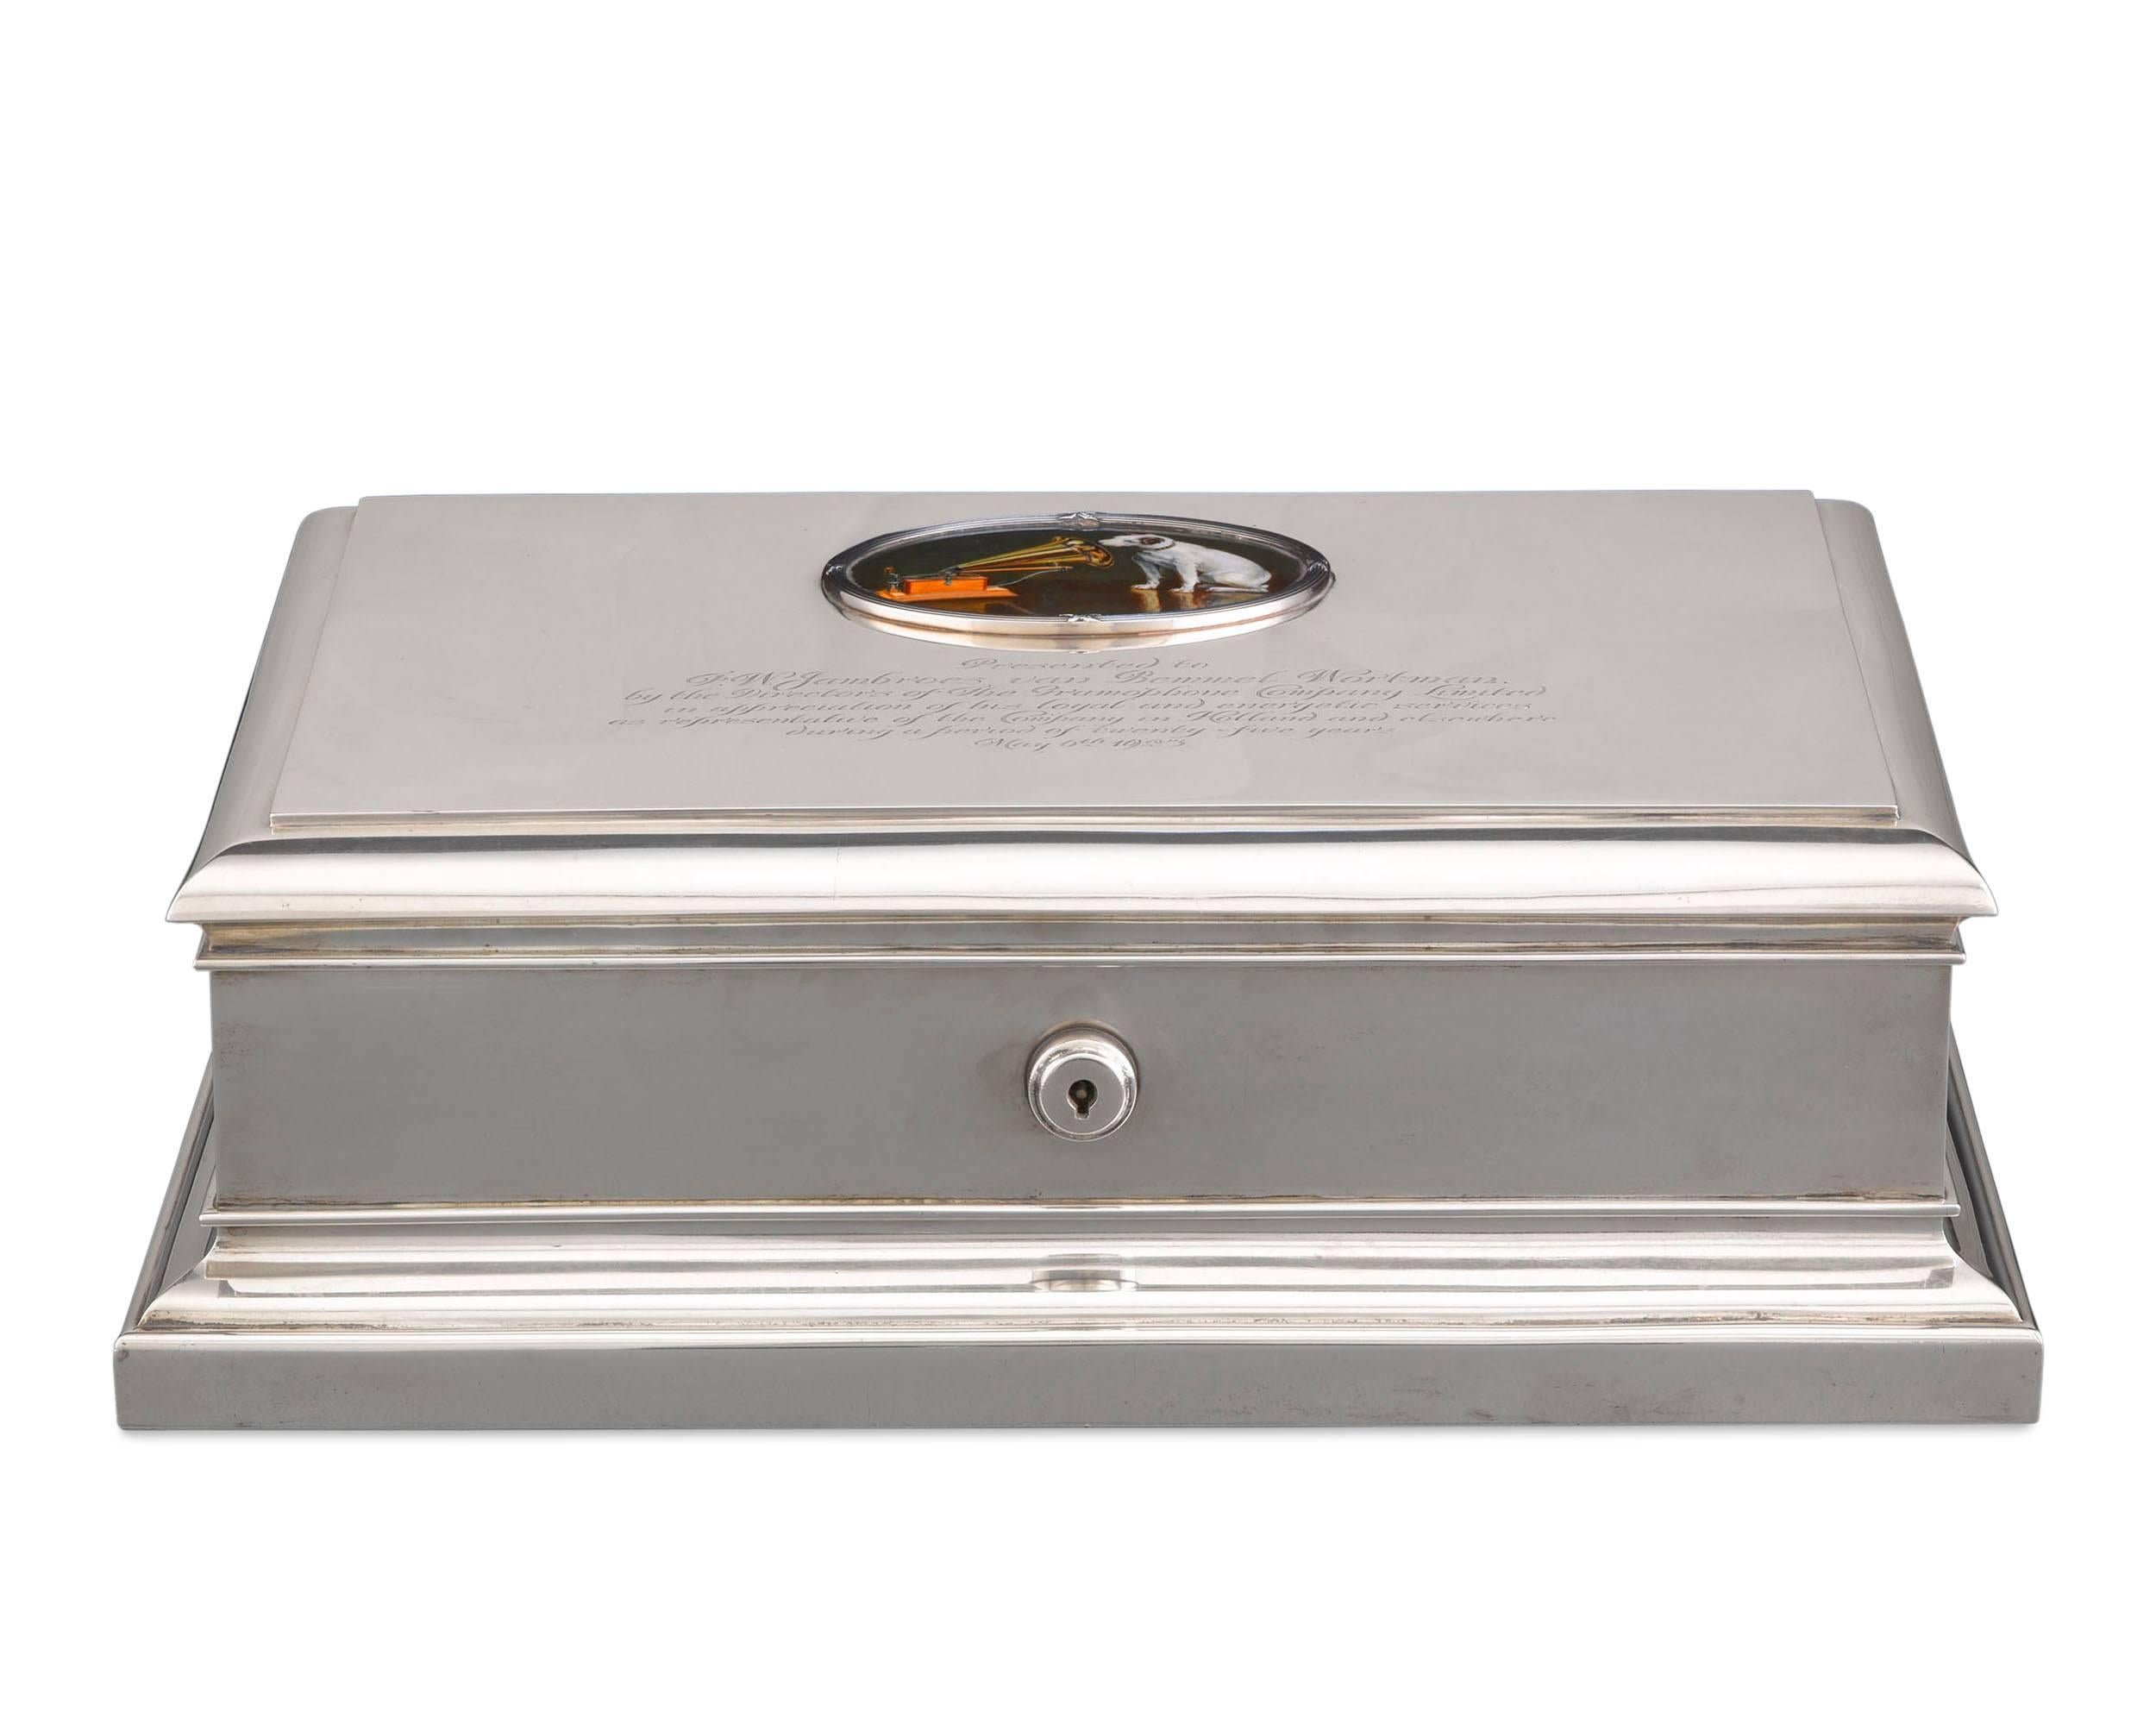 An exceptional and rare English silver cigar box by the Goldsmiths and Silversmiths Company, presented by The Gramophone Company Limited of Great Britain to Frederick Willem Jambroes van Bemmel Wortman, director of the company’s Netherlands and